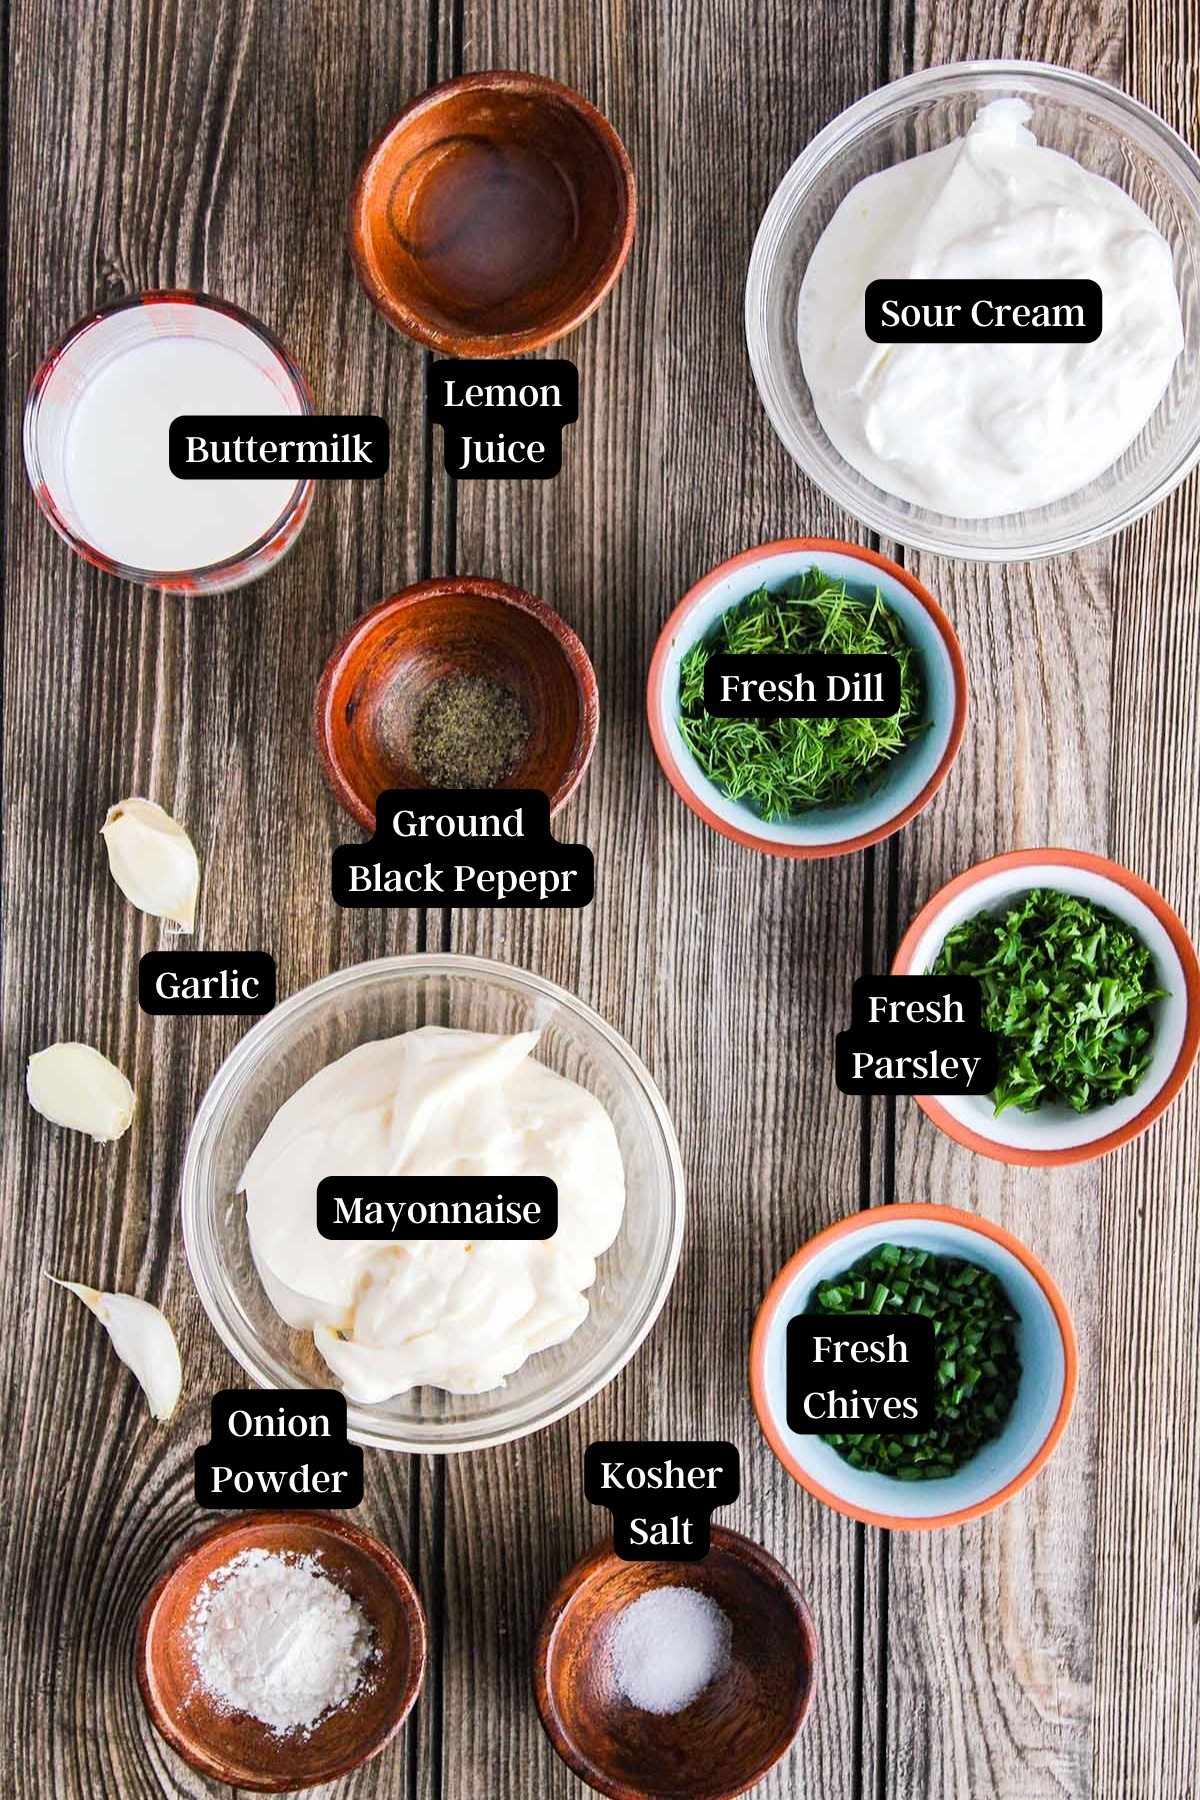 Ingredients for garlic ranch dressing (see recipe card).